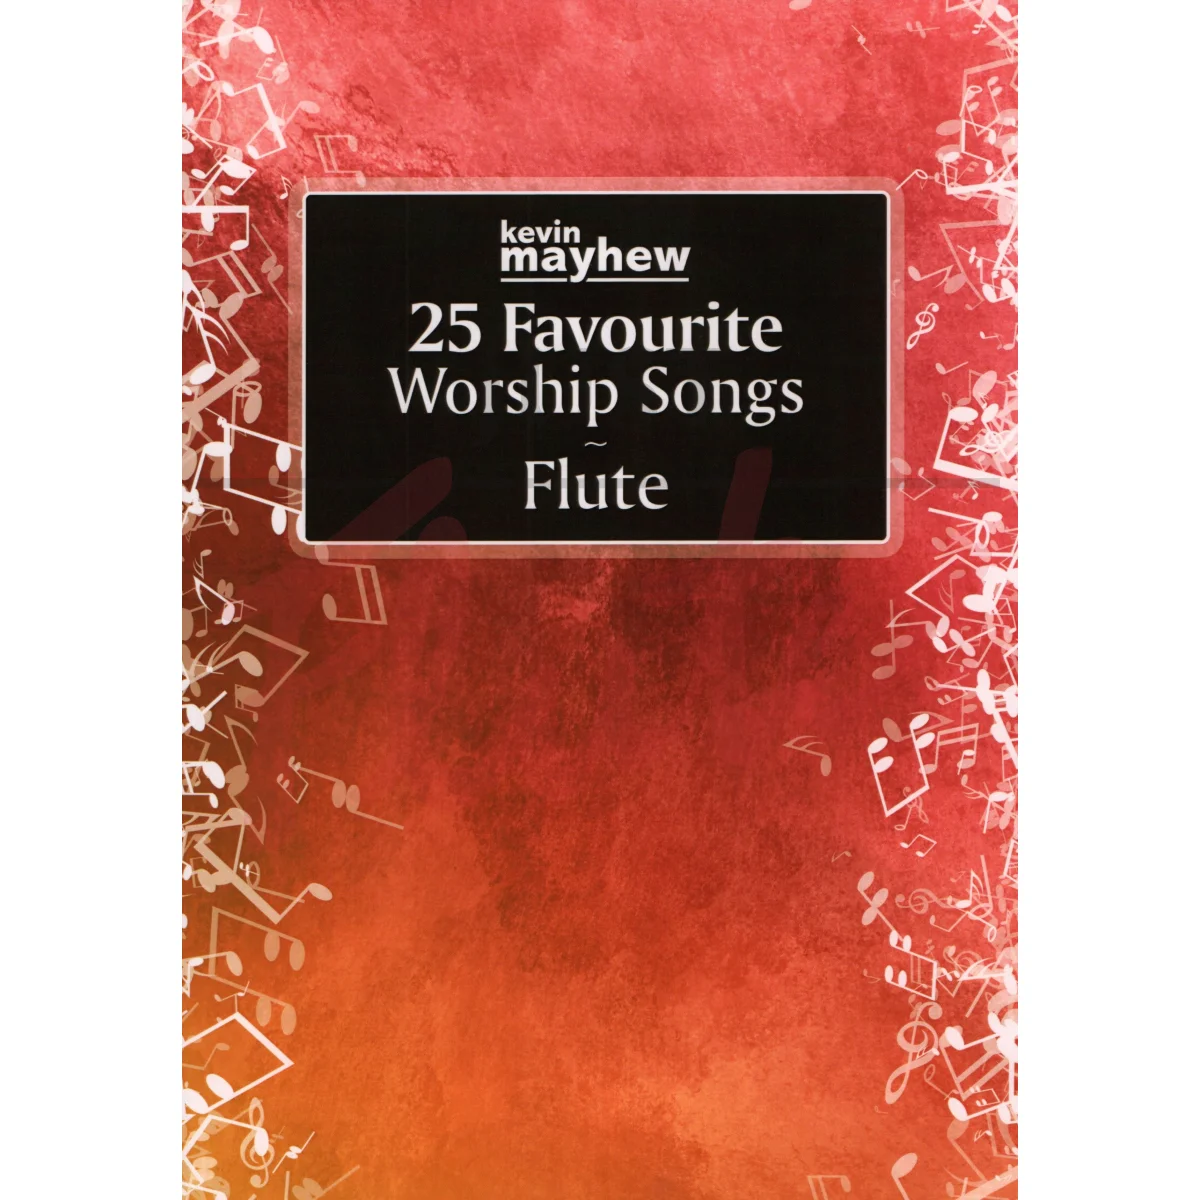 25 Favourite Worship Songs for Flute